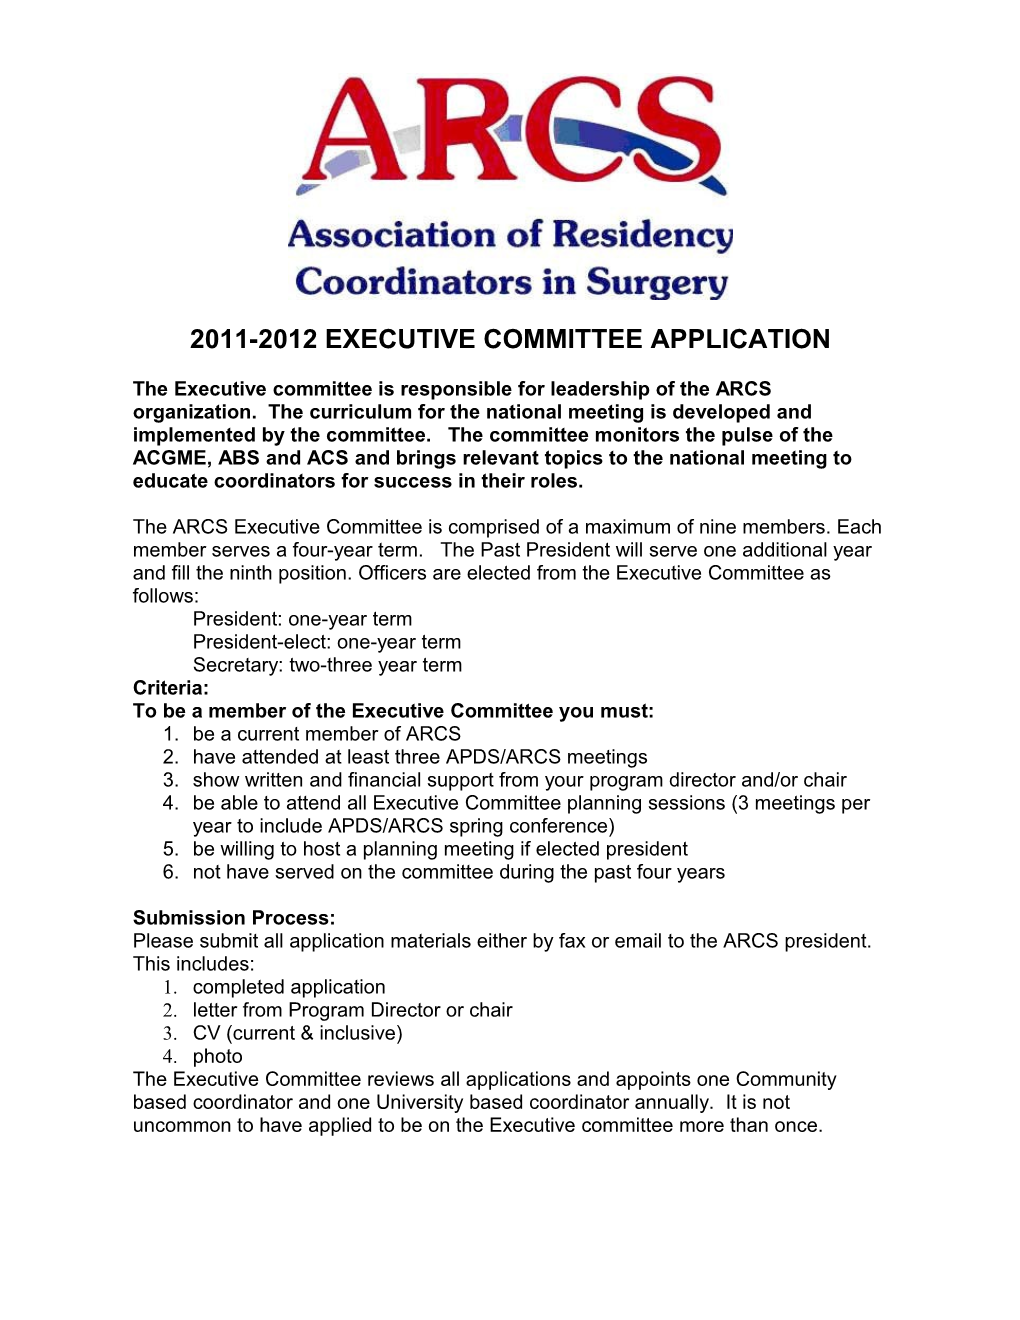 2011-2012 Executive Committee Application